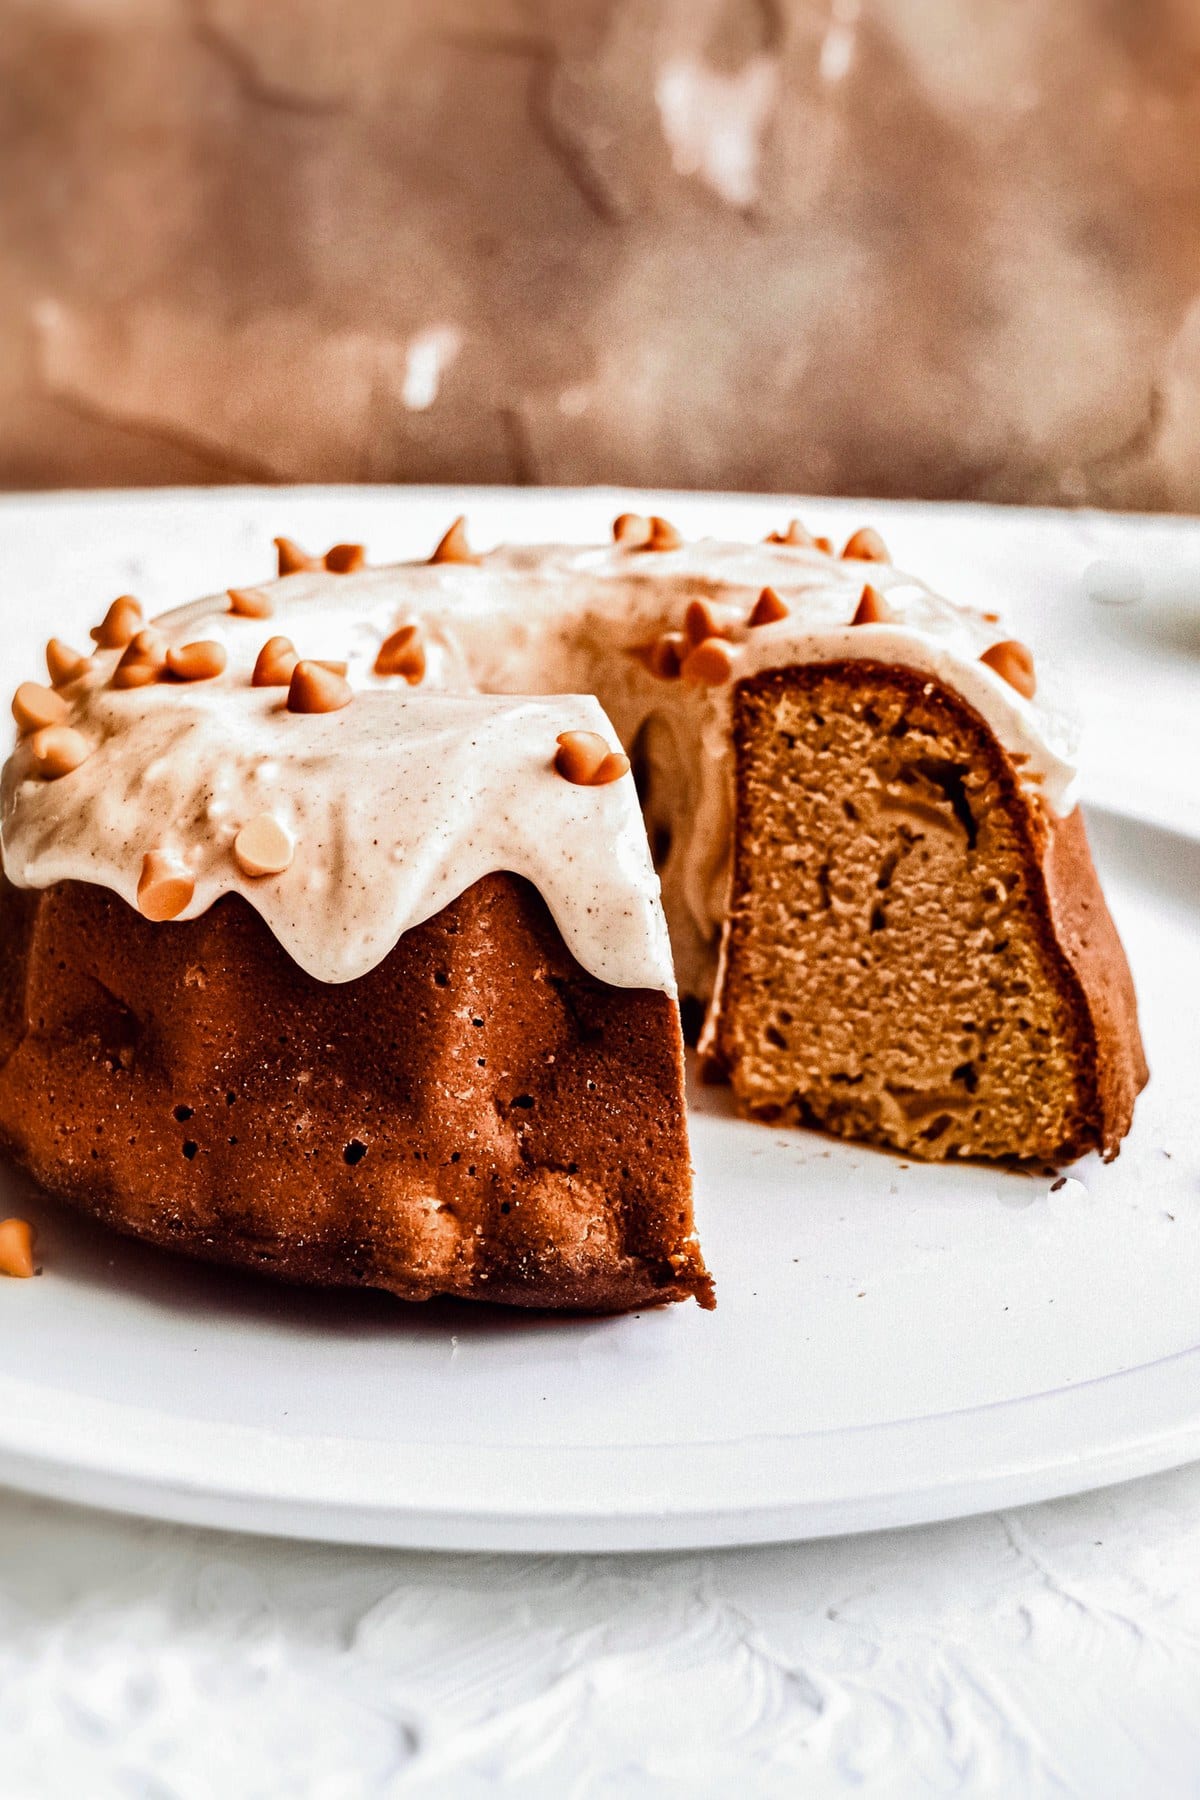 Chunky Apple Bundt Cake with a slice removed to show the interior.